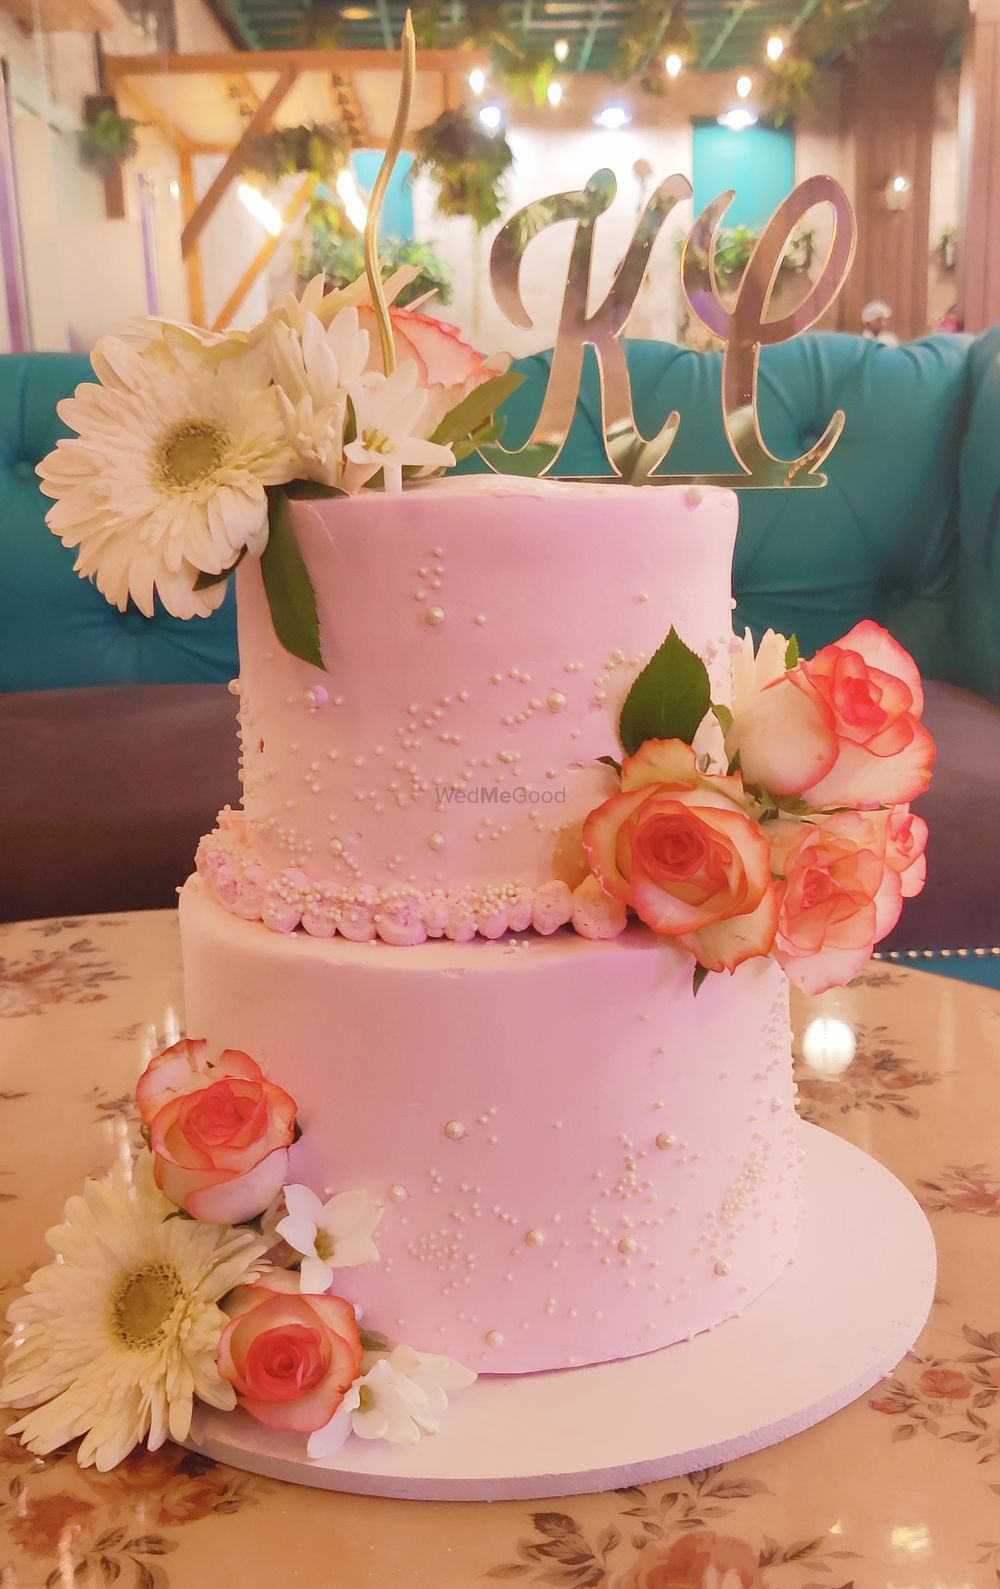 Photo From Wedding cakes - By The Whiskology